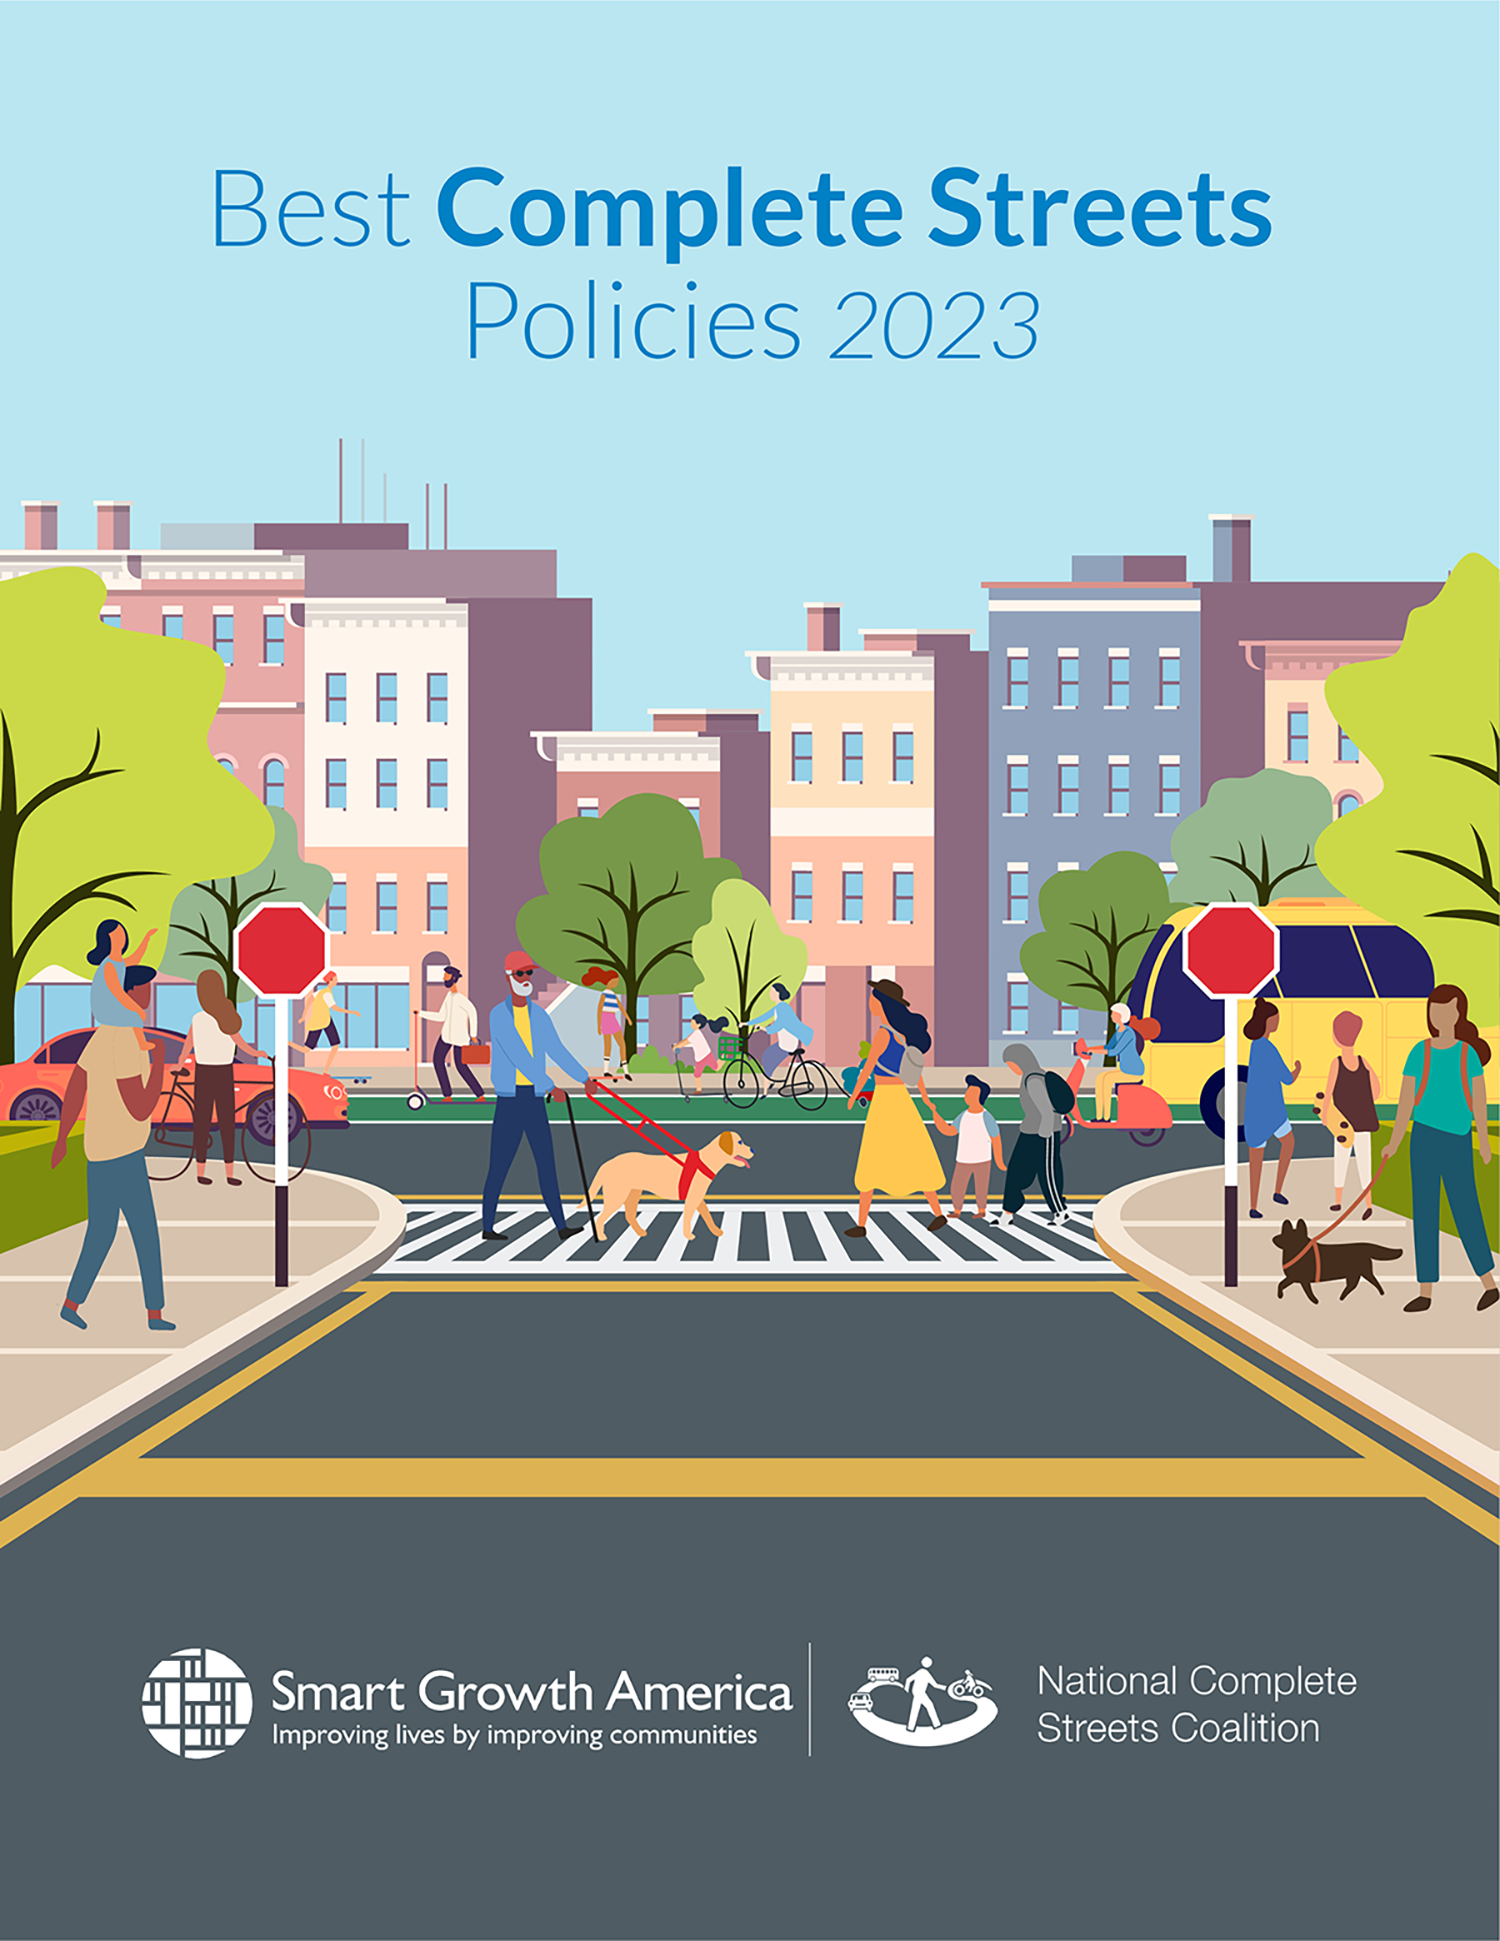 The Best Complete Streets Policies 2023